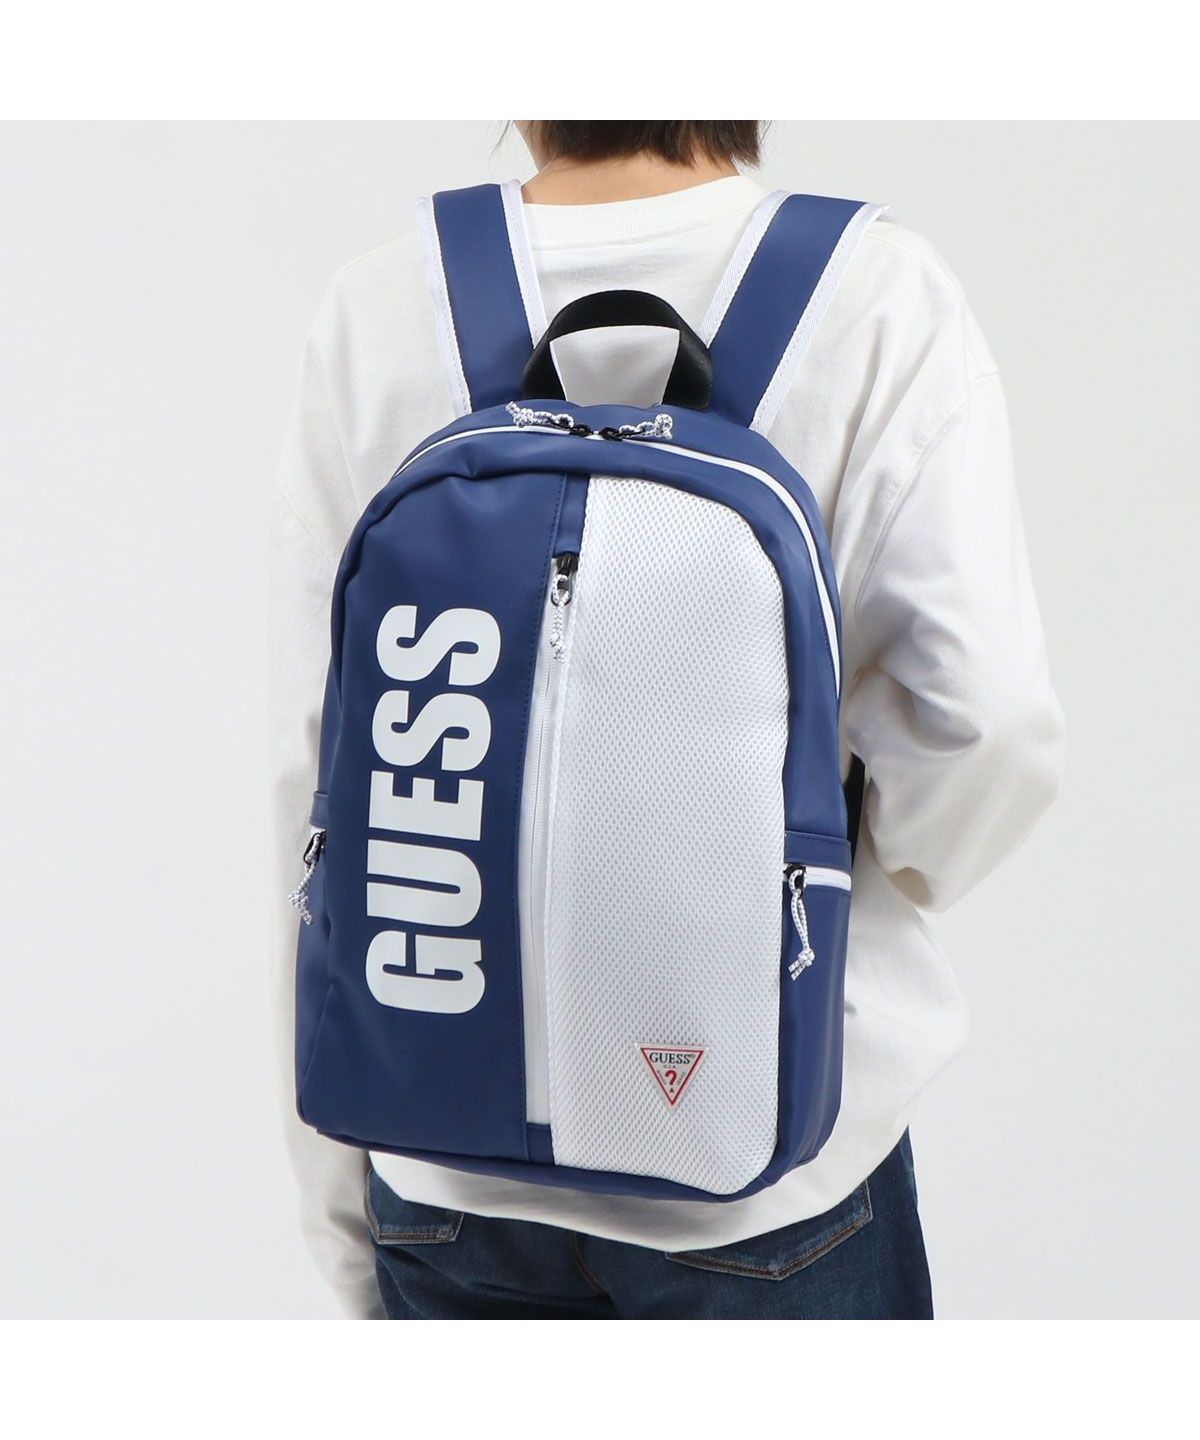 GUESSリュック バッグ | discovermediaworks.com